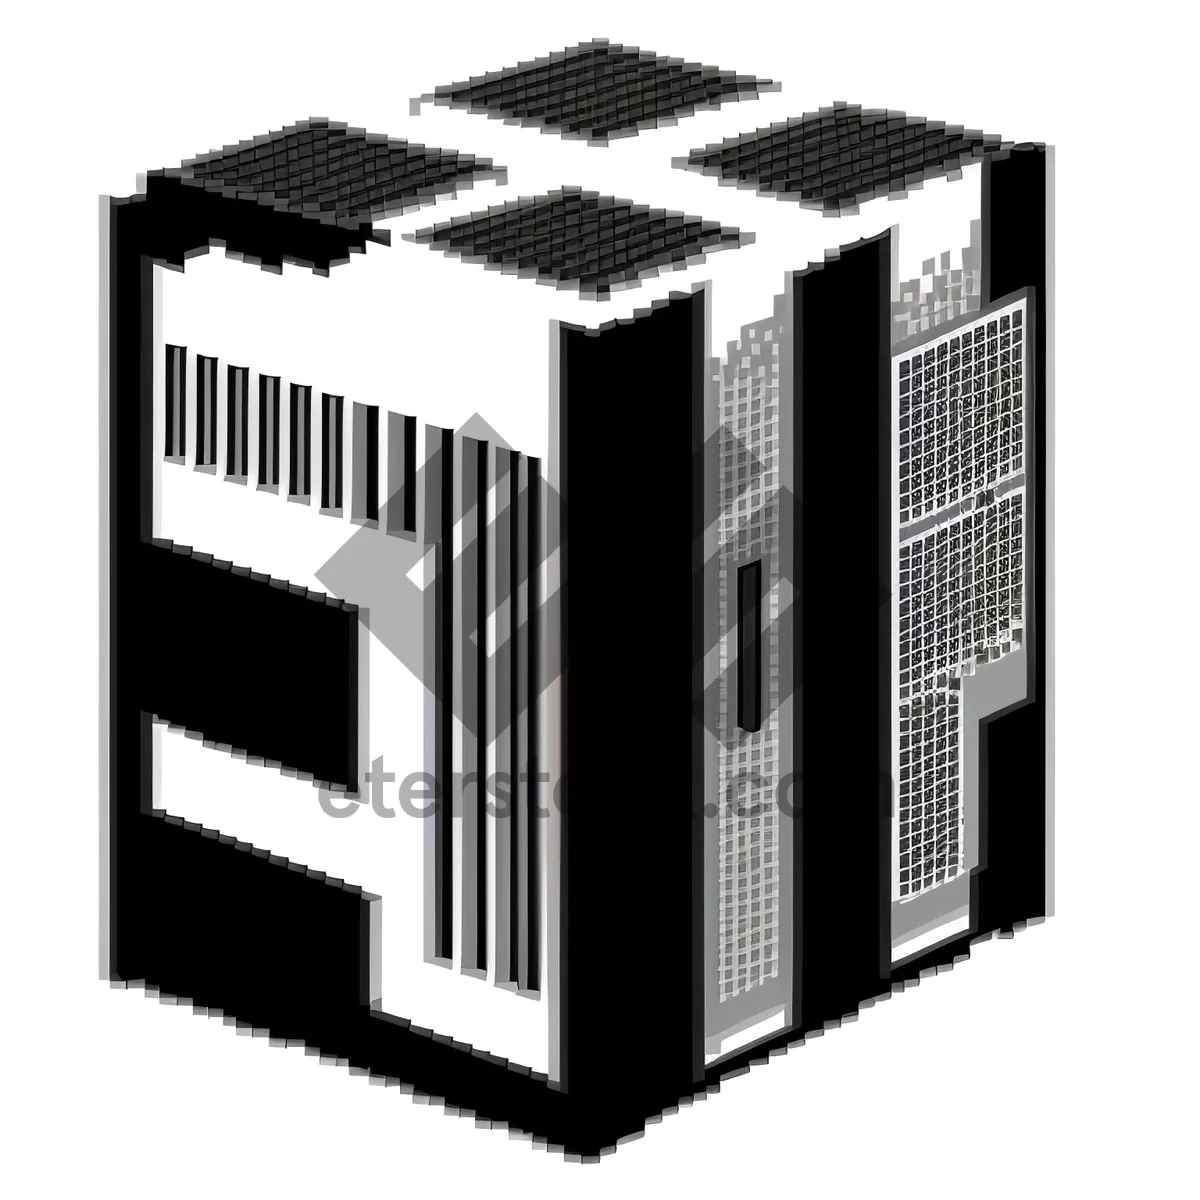 Picture of Accordion Box: 3D Musical Keyboard